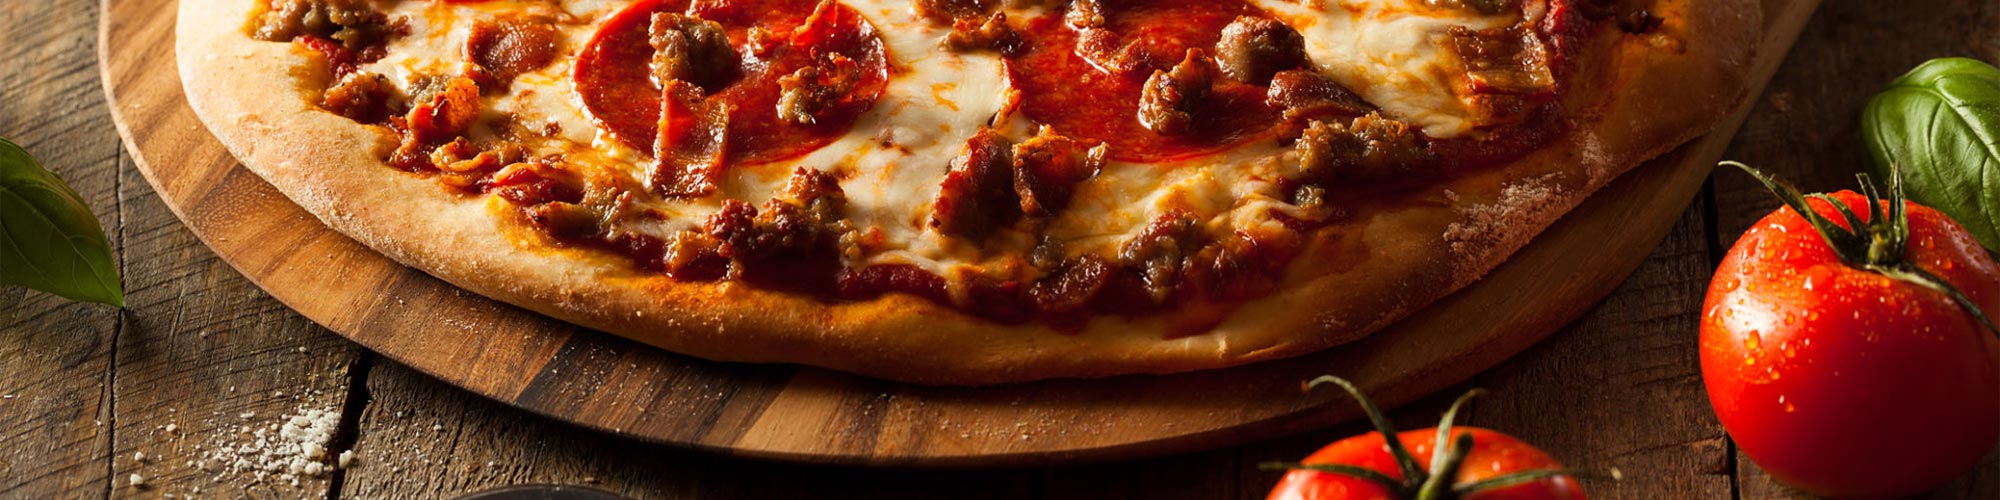 Hot & Fresh Sausage and Pepperoni Pizza